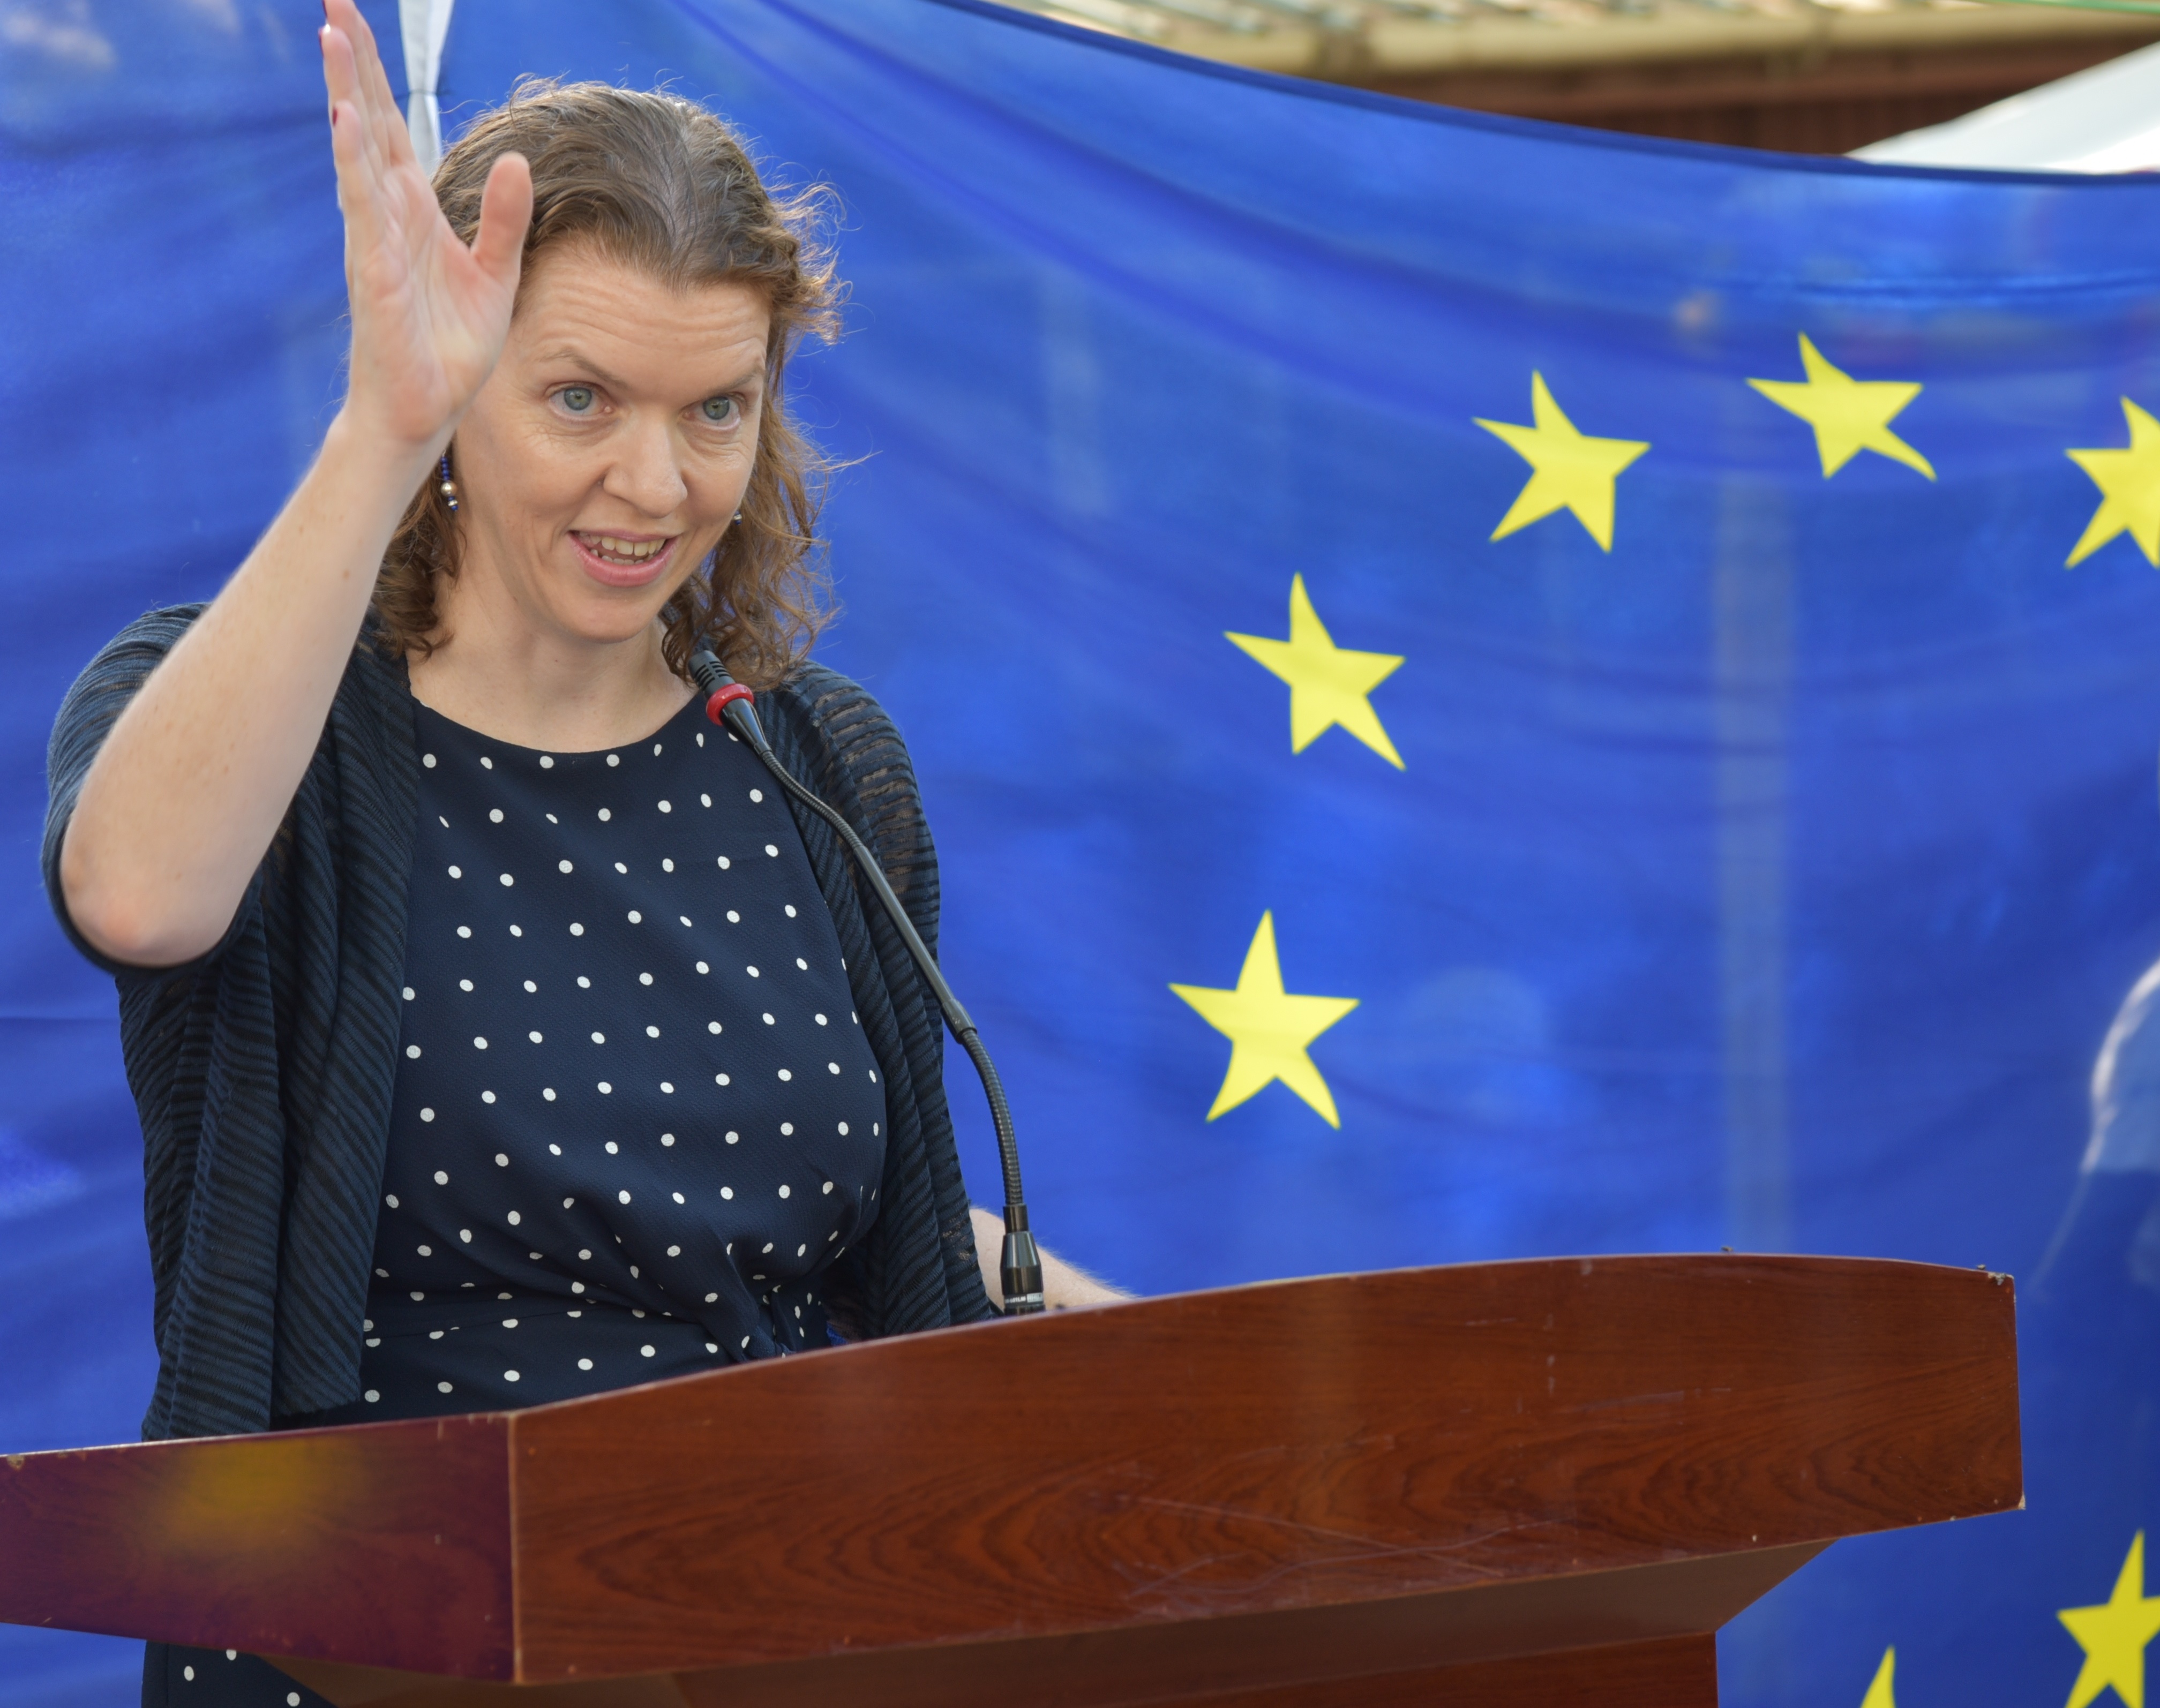 Compromise on administrative areas, EU tells peace parties